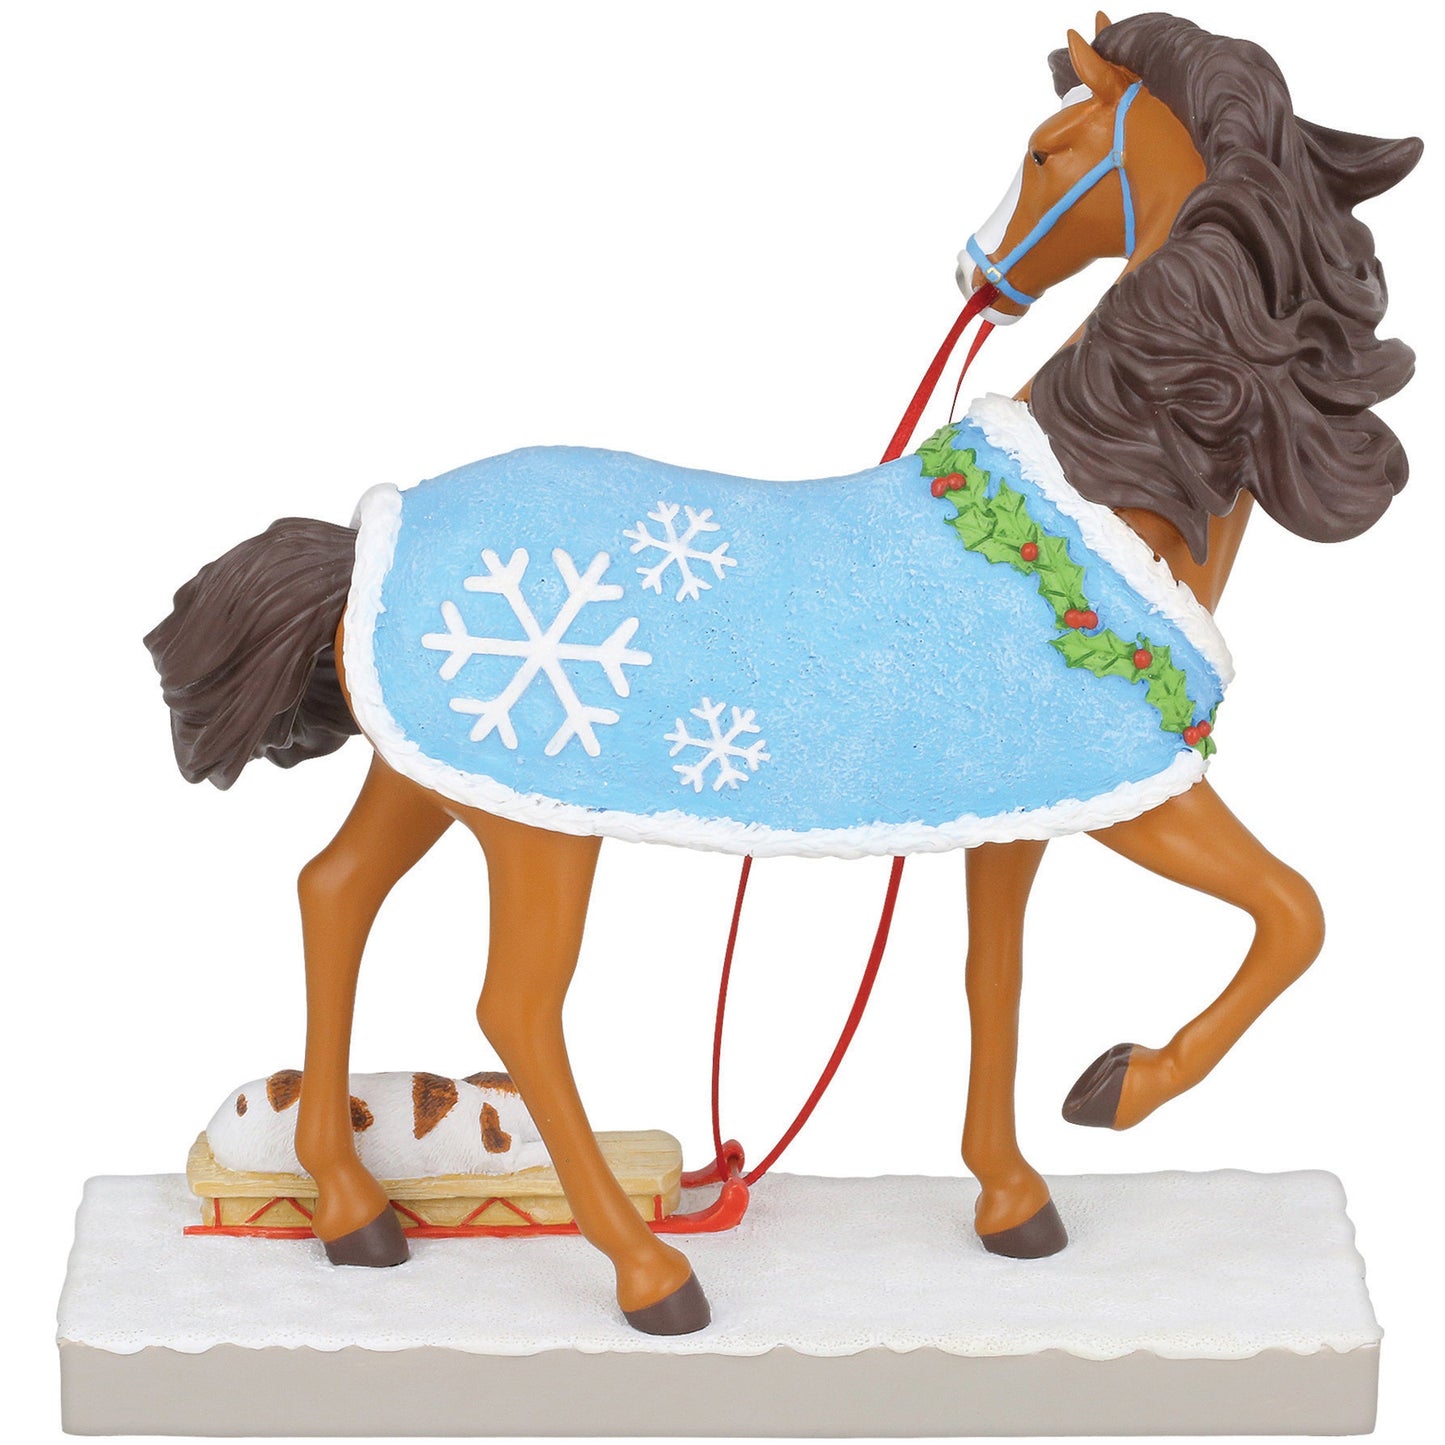 The Trail of Painted Ponies - Snow Ready-Top Brands-The Equestrian